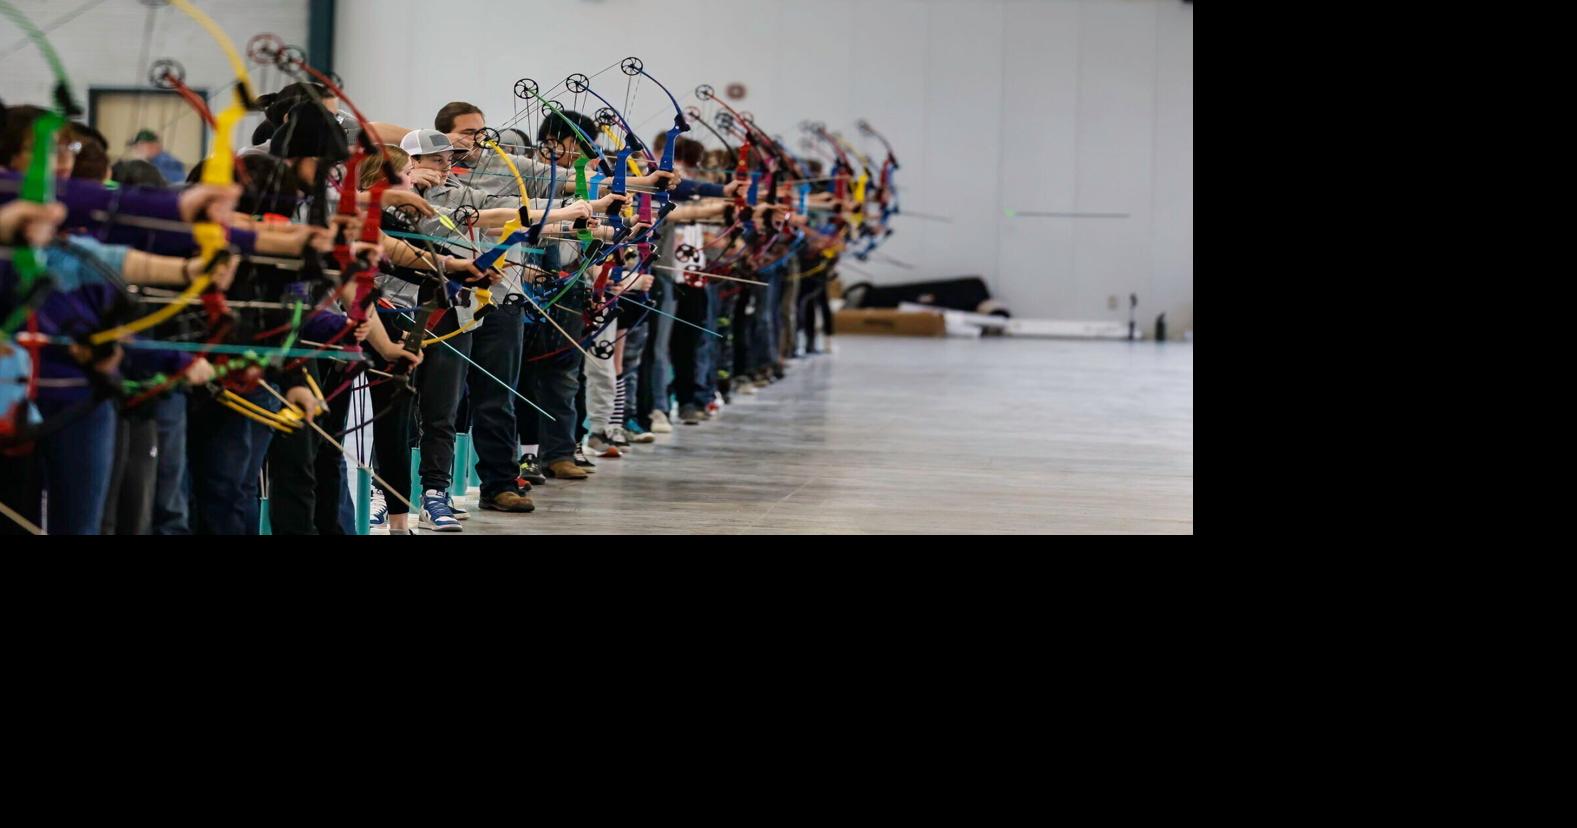 ‘Always try something new’: Helena hosts first-ever NASP Montana State Archery Tournament